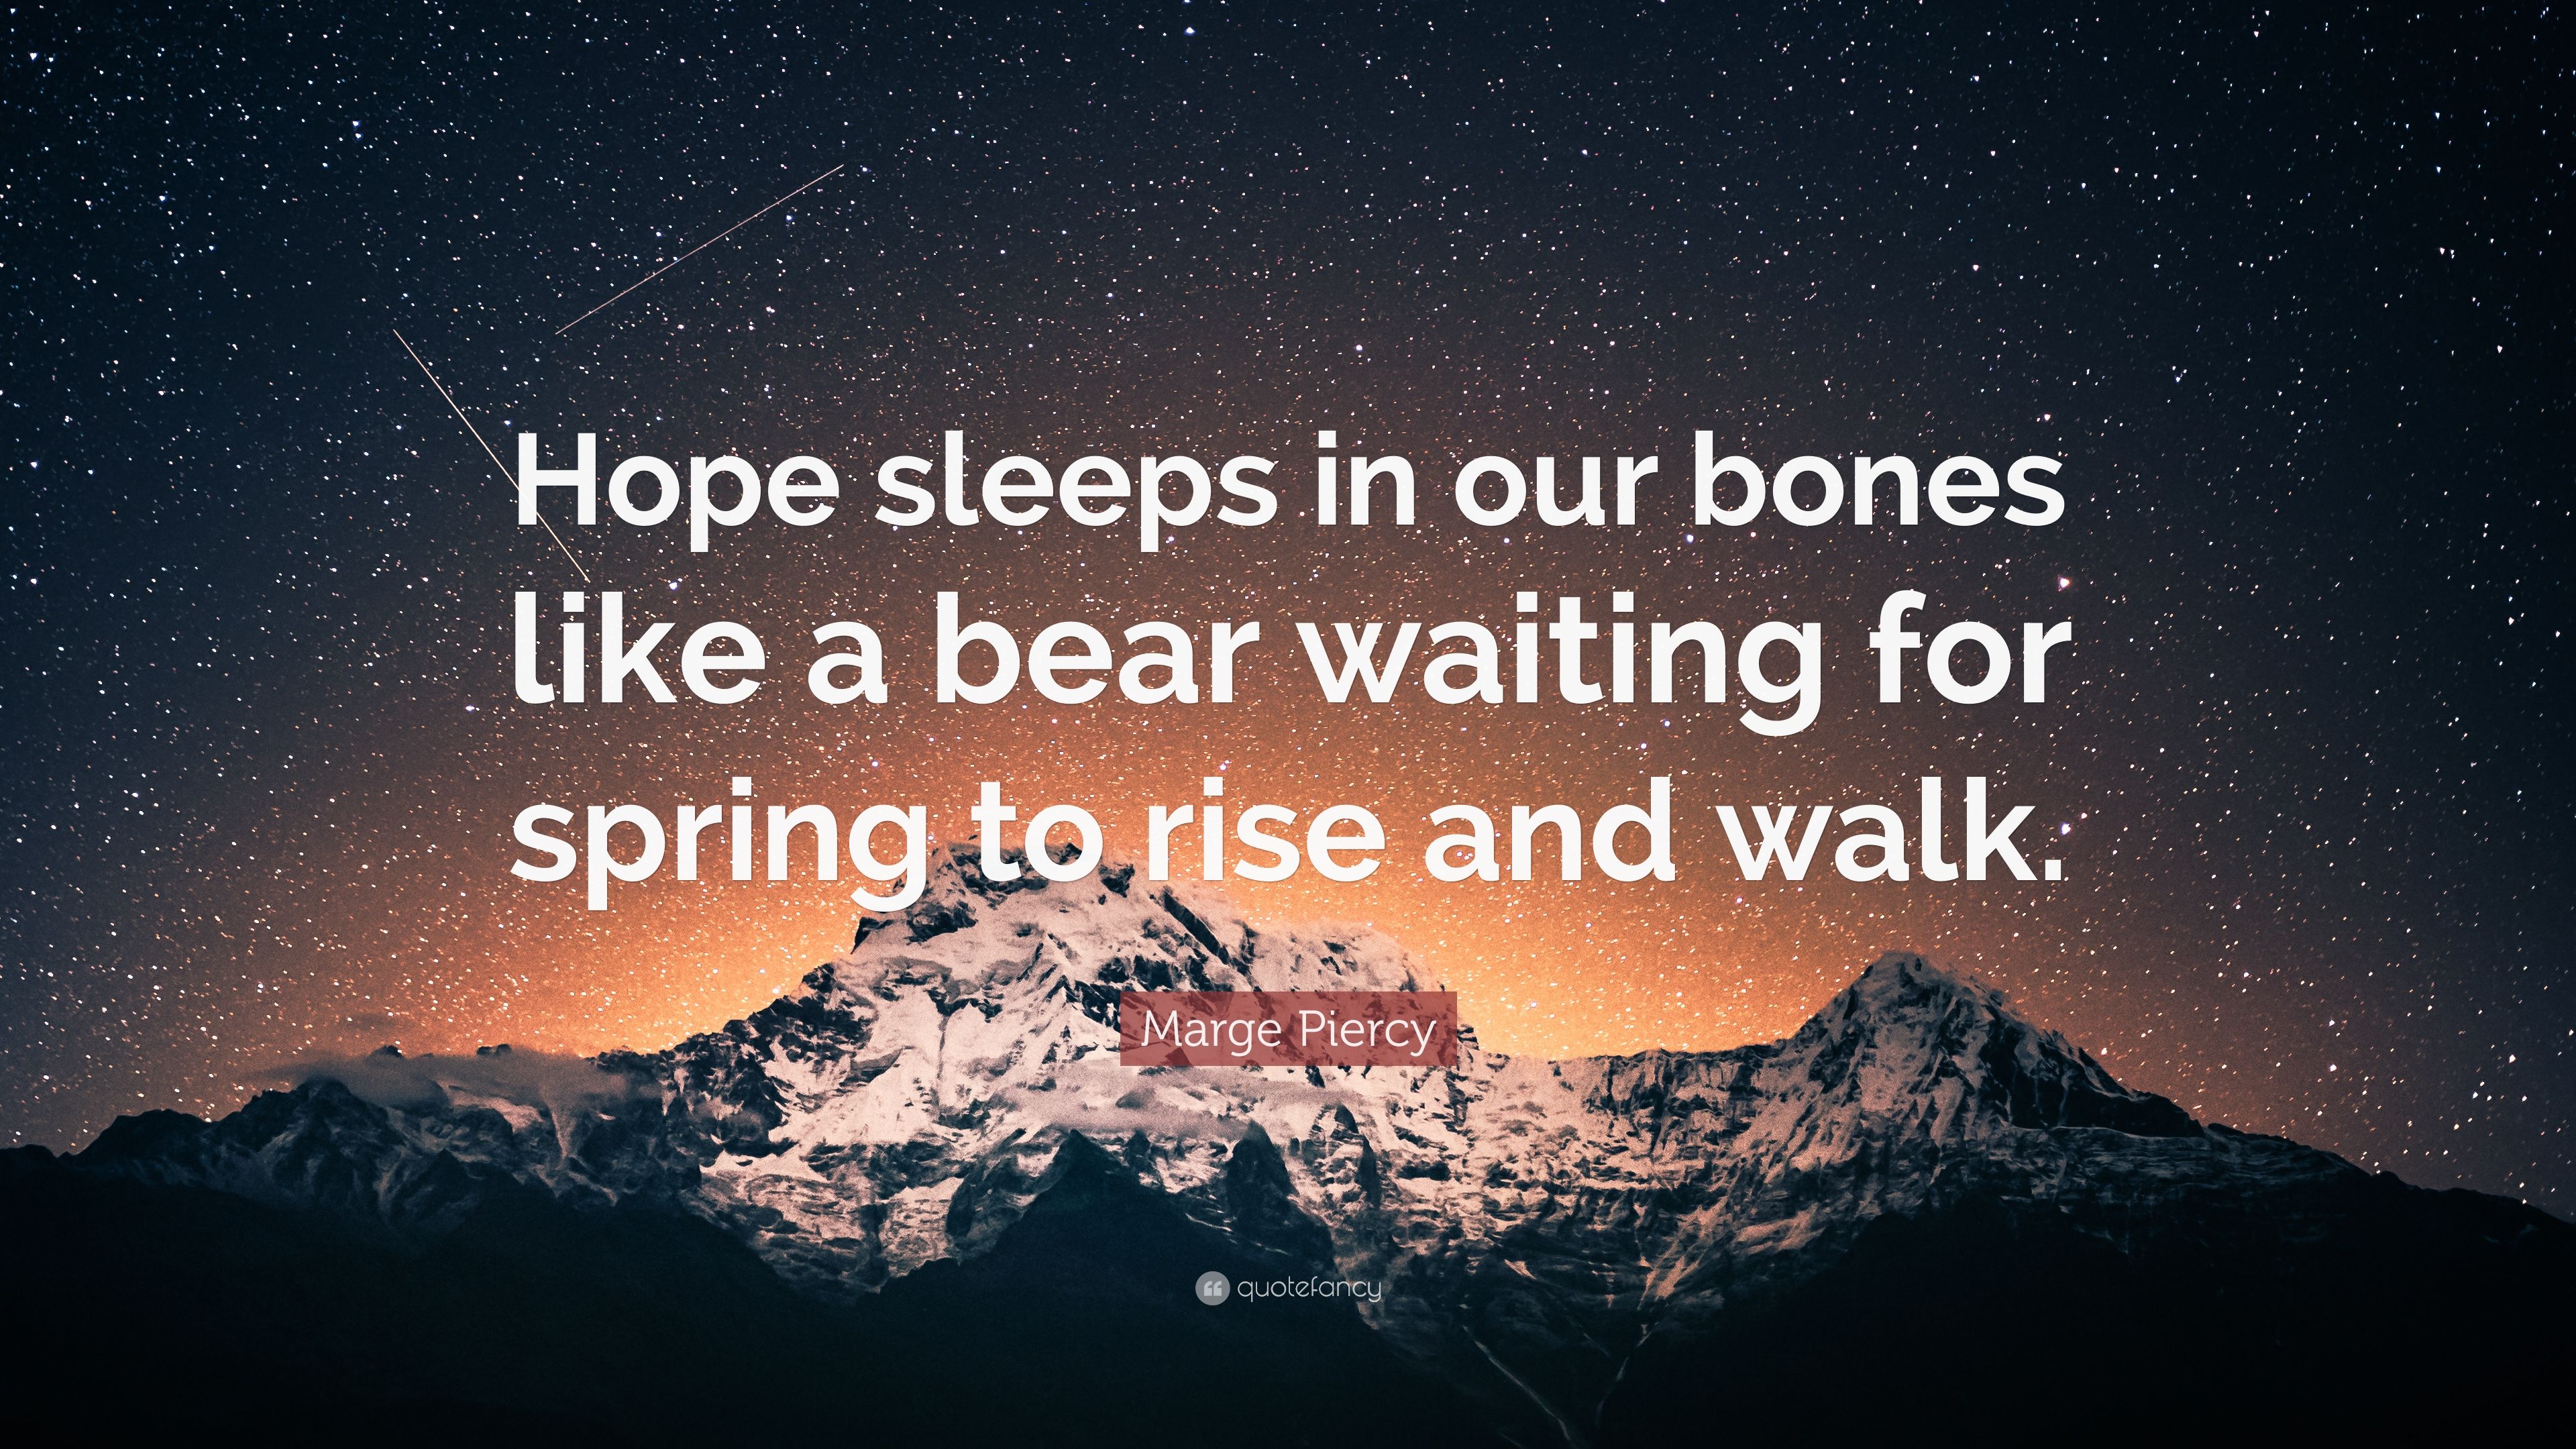 Marge Piercy Quote: “Hope sleeps in our bones like a bear